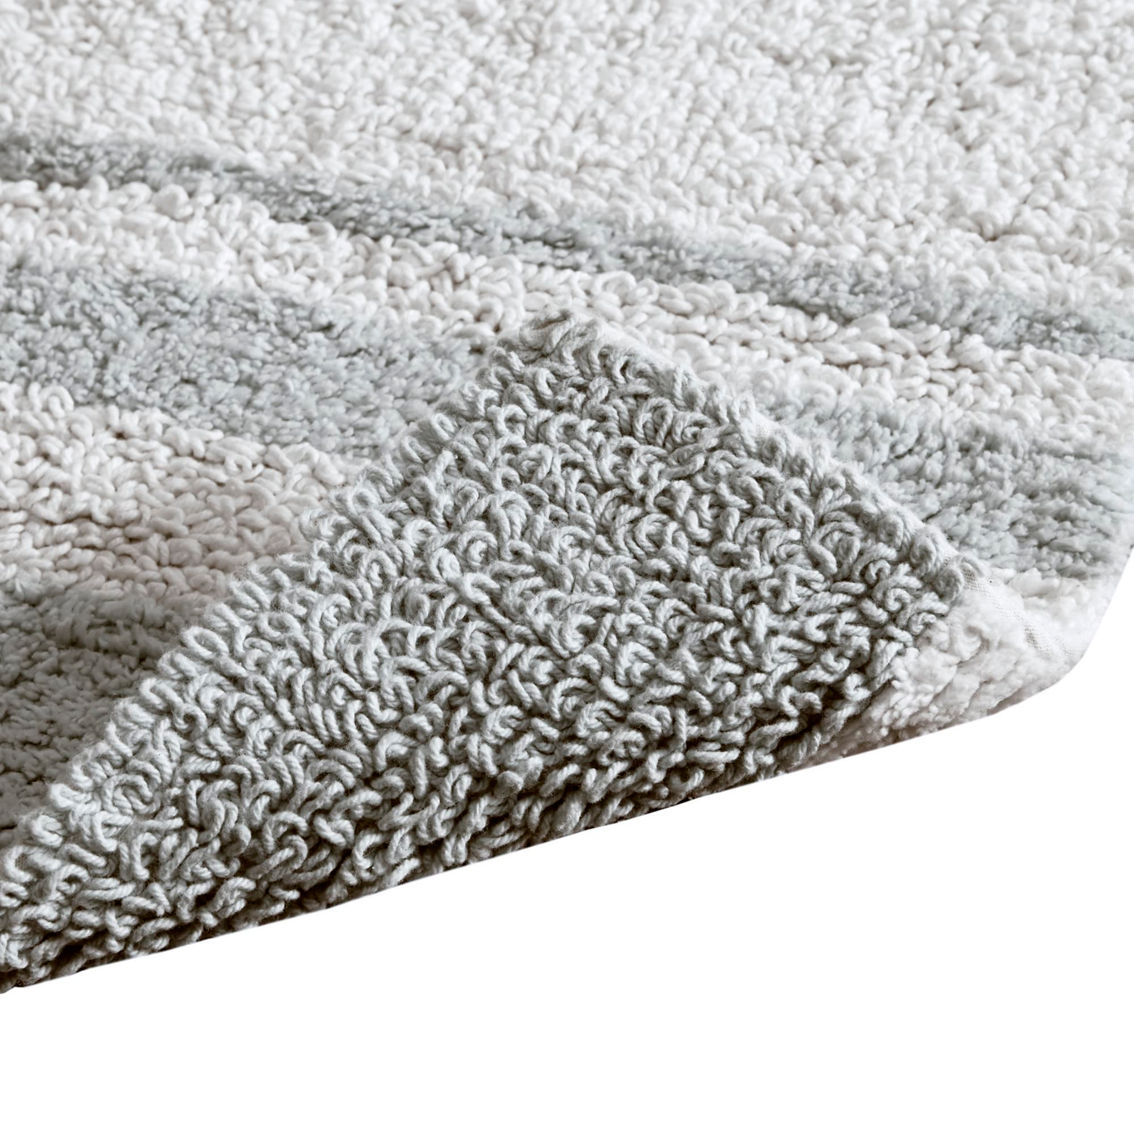 Madison Park Spa Cotton Reversible Bath Rug 24 X 72 in. - Image 3 of 5